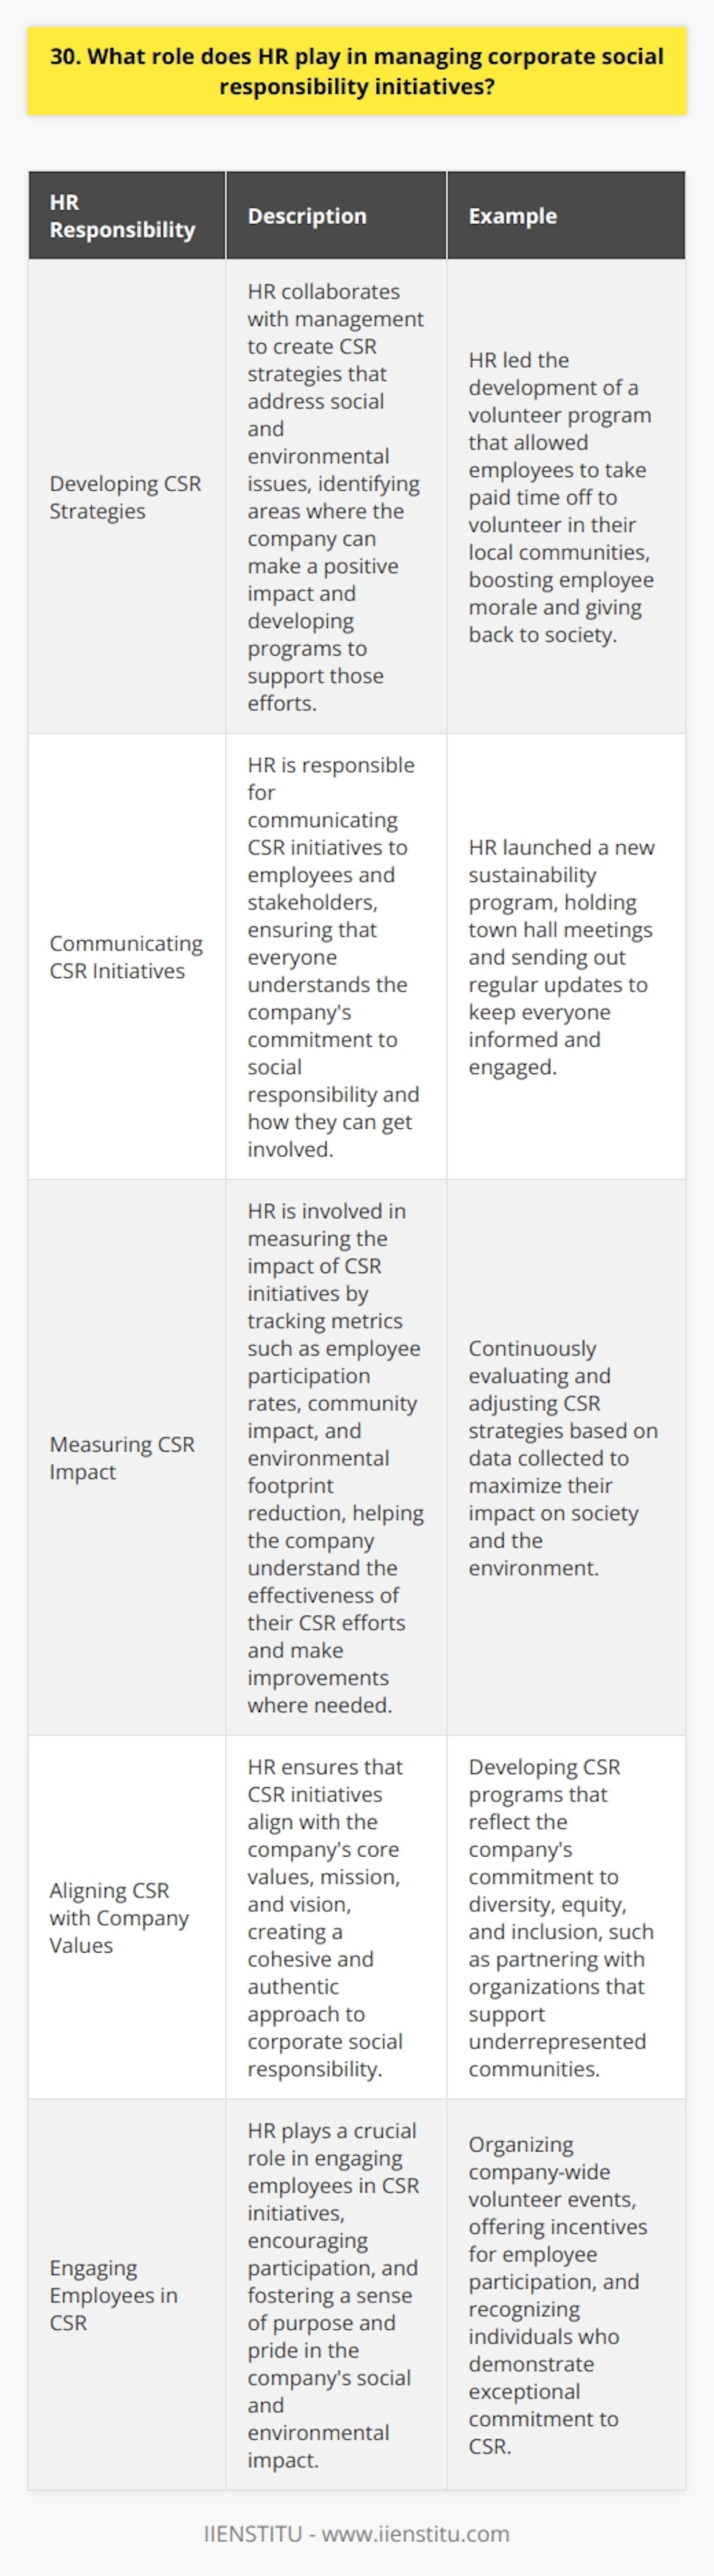 HR plays a crucial role in managing corporate social responsibility (CSR) initiatives. They are responsible for developing and implementing CSR strategies that align with the companys values and goals. Developing CSR Strategies HR collaborates with management to create CSR strategies that address social and environmental issues. They identify areas where the company can make a positive impact and develop programs to support those efforts. For example, at my previous company, HR led the development of a volunteer program that allowed employees to take paid time off to volunteer in their local communities. It was a great way to give back and boost employee morale. Communicating CSR Initiatives HR is also responsible for communicating CSR initiatives to employees and stakeholders. They ensure that everyone understands the companys commitment to social responsibility and how they can get involved. I remember when HR launched a new sustainability program at my last job. They held town hall meetings and sent out regular updates to keep everyone informed and engaged. Measuring CSR Impact Finally, HR is involved in measuring the impact of CSR initiatives. They track metrics such as employee participation rates, community impact, and environmental footprint reduction. This data helps the company understand the effectiveness of their CSR efforts and make improvements where needed. Its important to continuously evaluate and adjust CSR strategies to maximize their impact. In my opinion, HR plays a vital role in driving corporate social responsibility. Their involvement ensures that CSR is integrated into the companys culture and operations, making a real difference in the world.